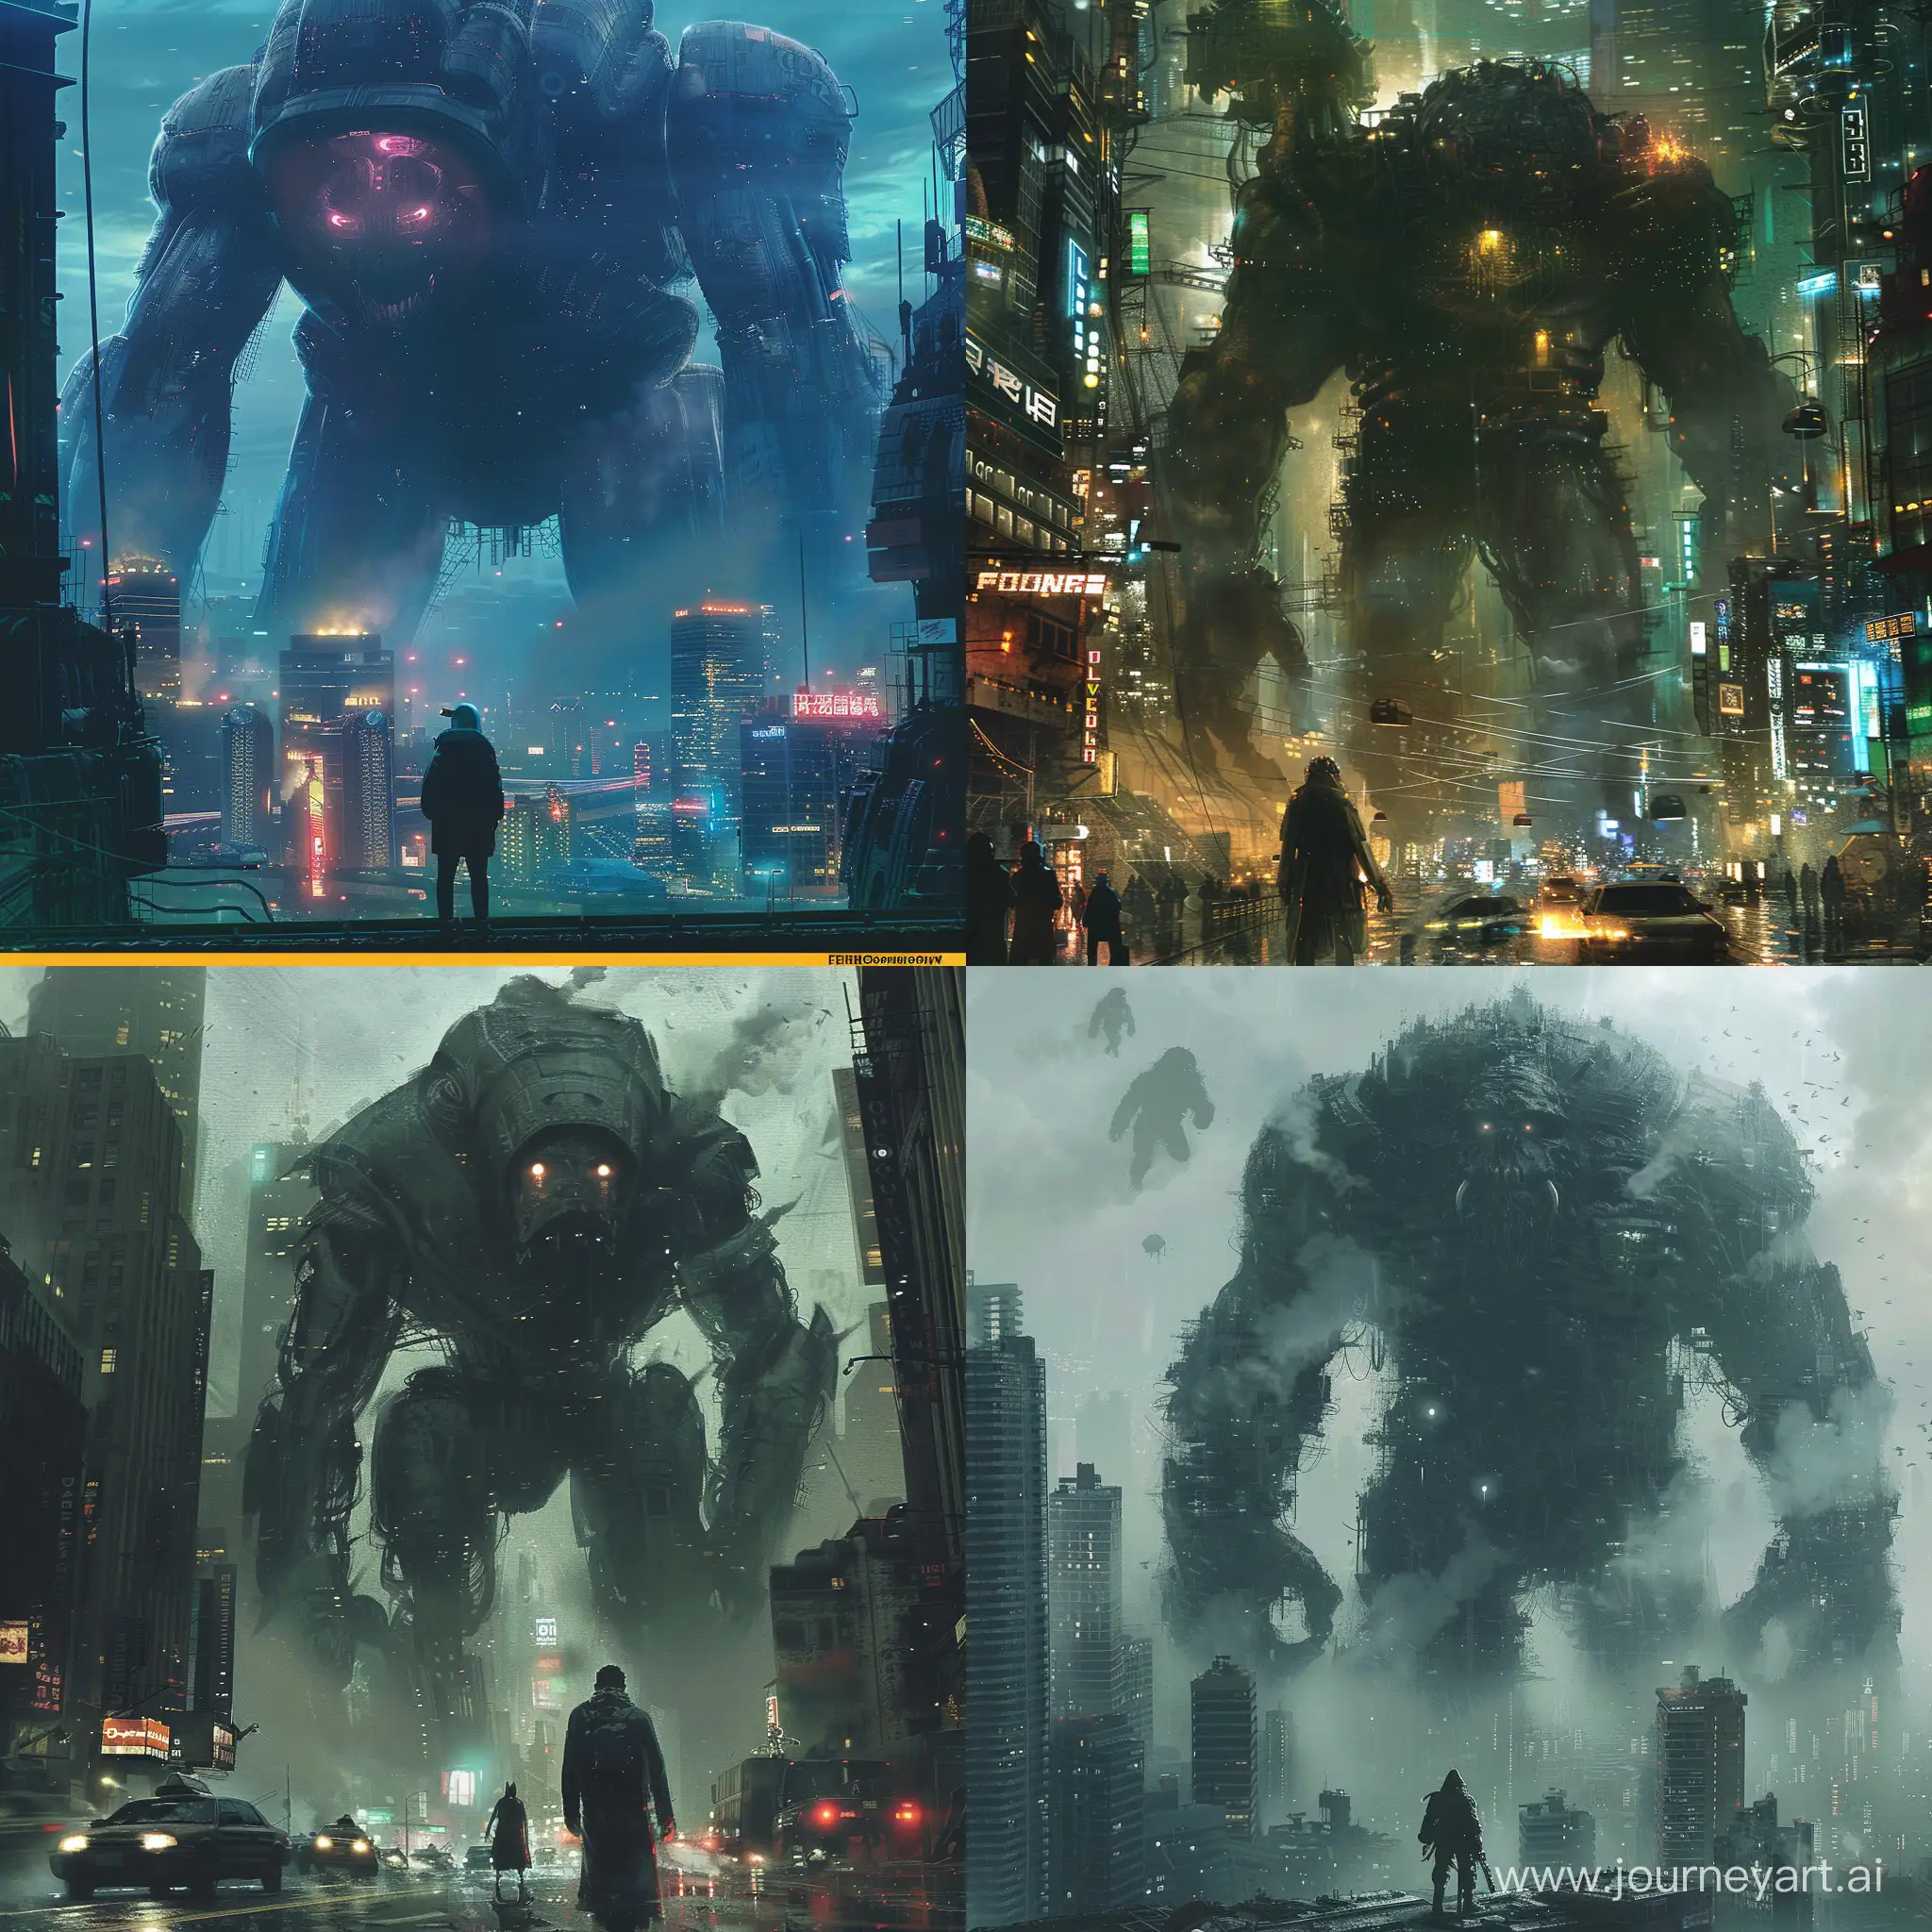 Futuristic-Cityscape-with-Enormous-Cyberpunk-Beings